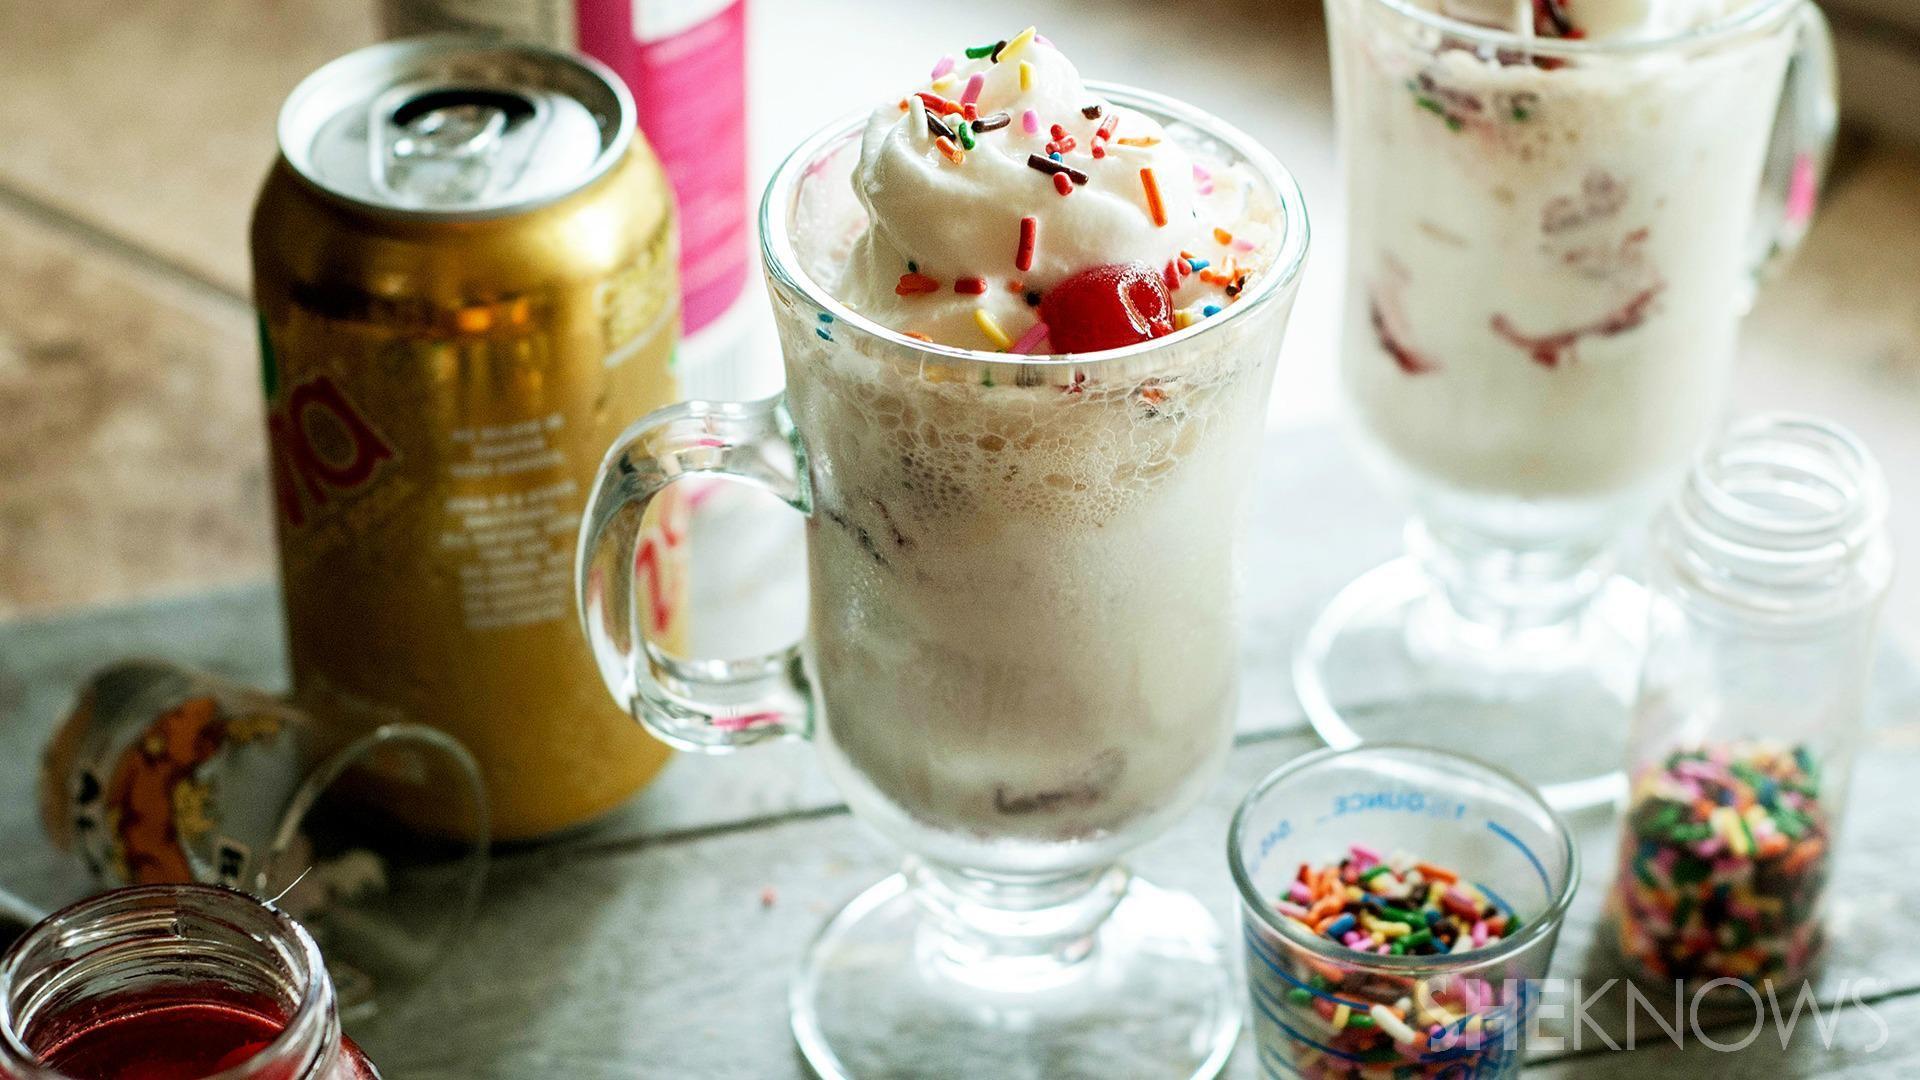 Boozy cake batter ice cream float will make you glad you're 21+